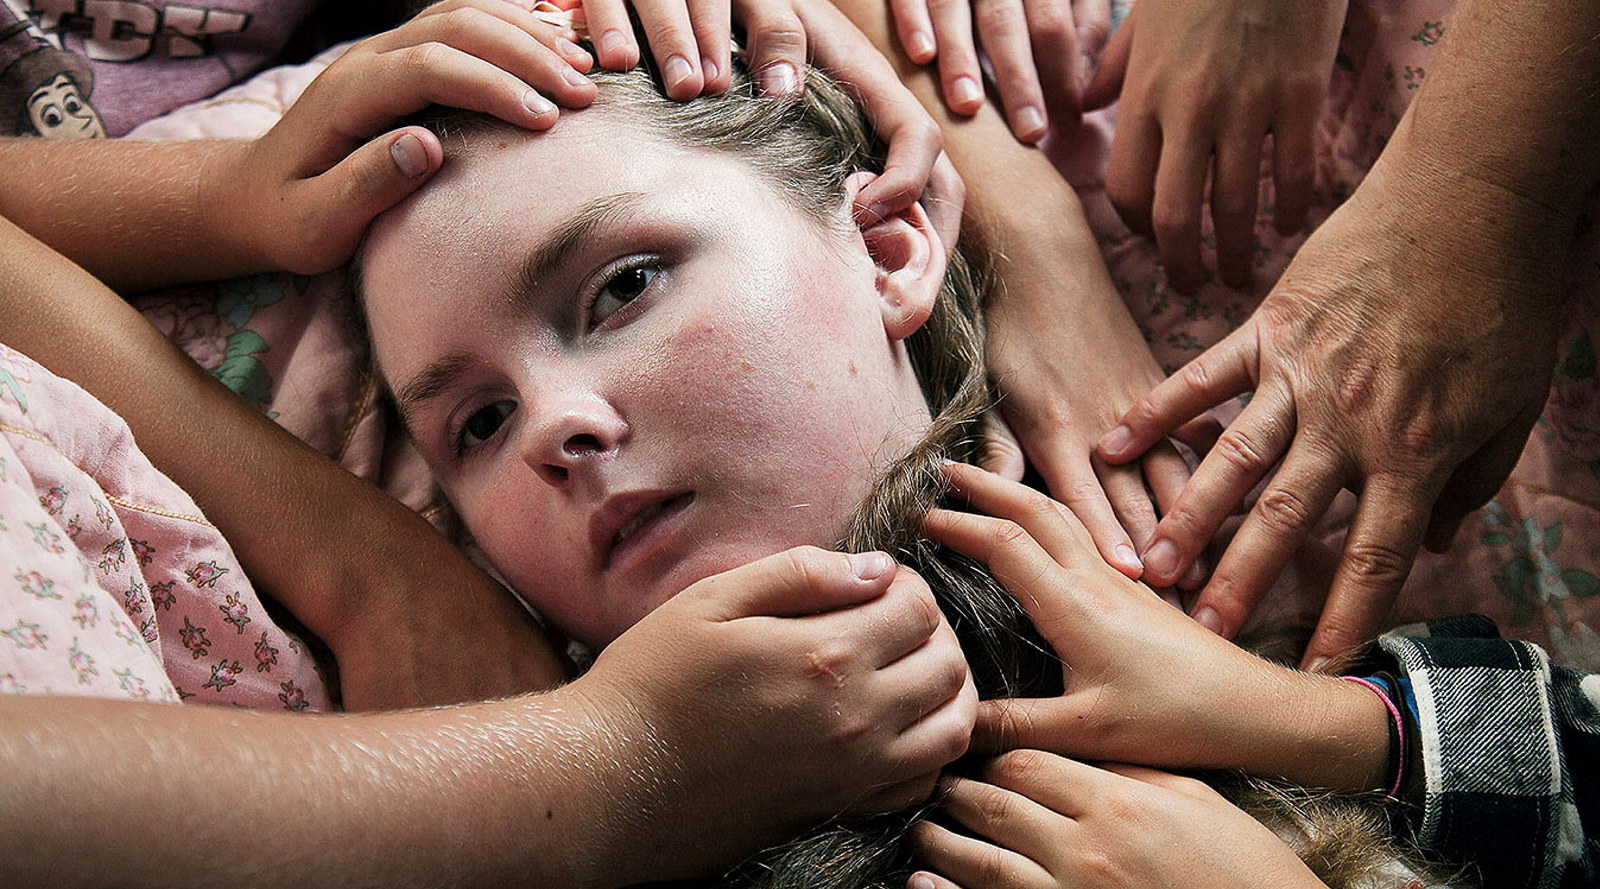 Closeup of girl's face with many hands holding or framing it.